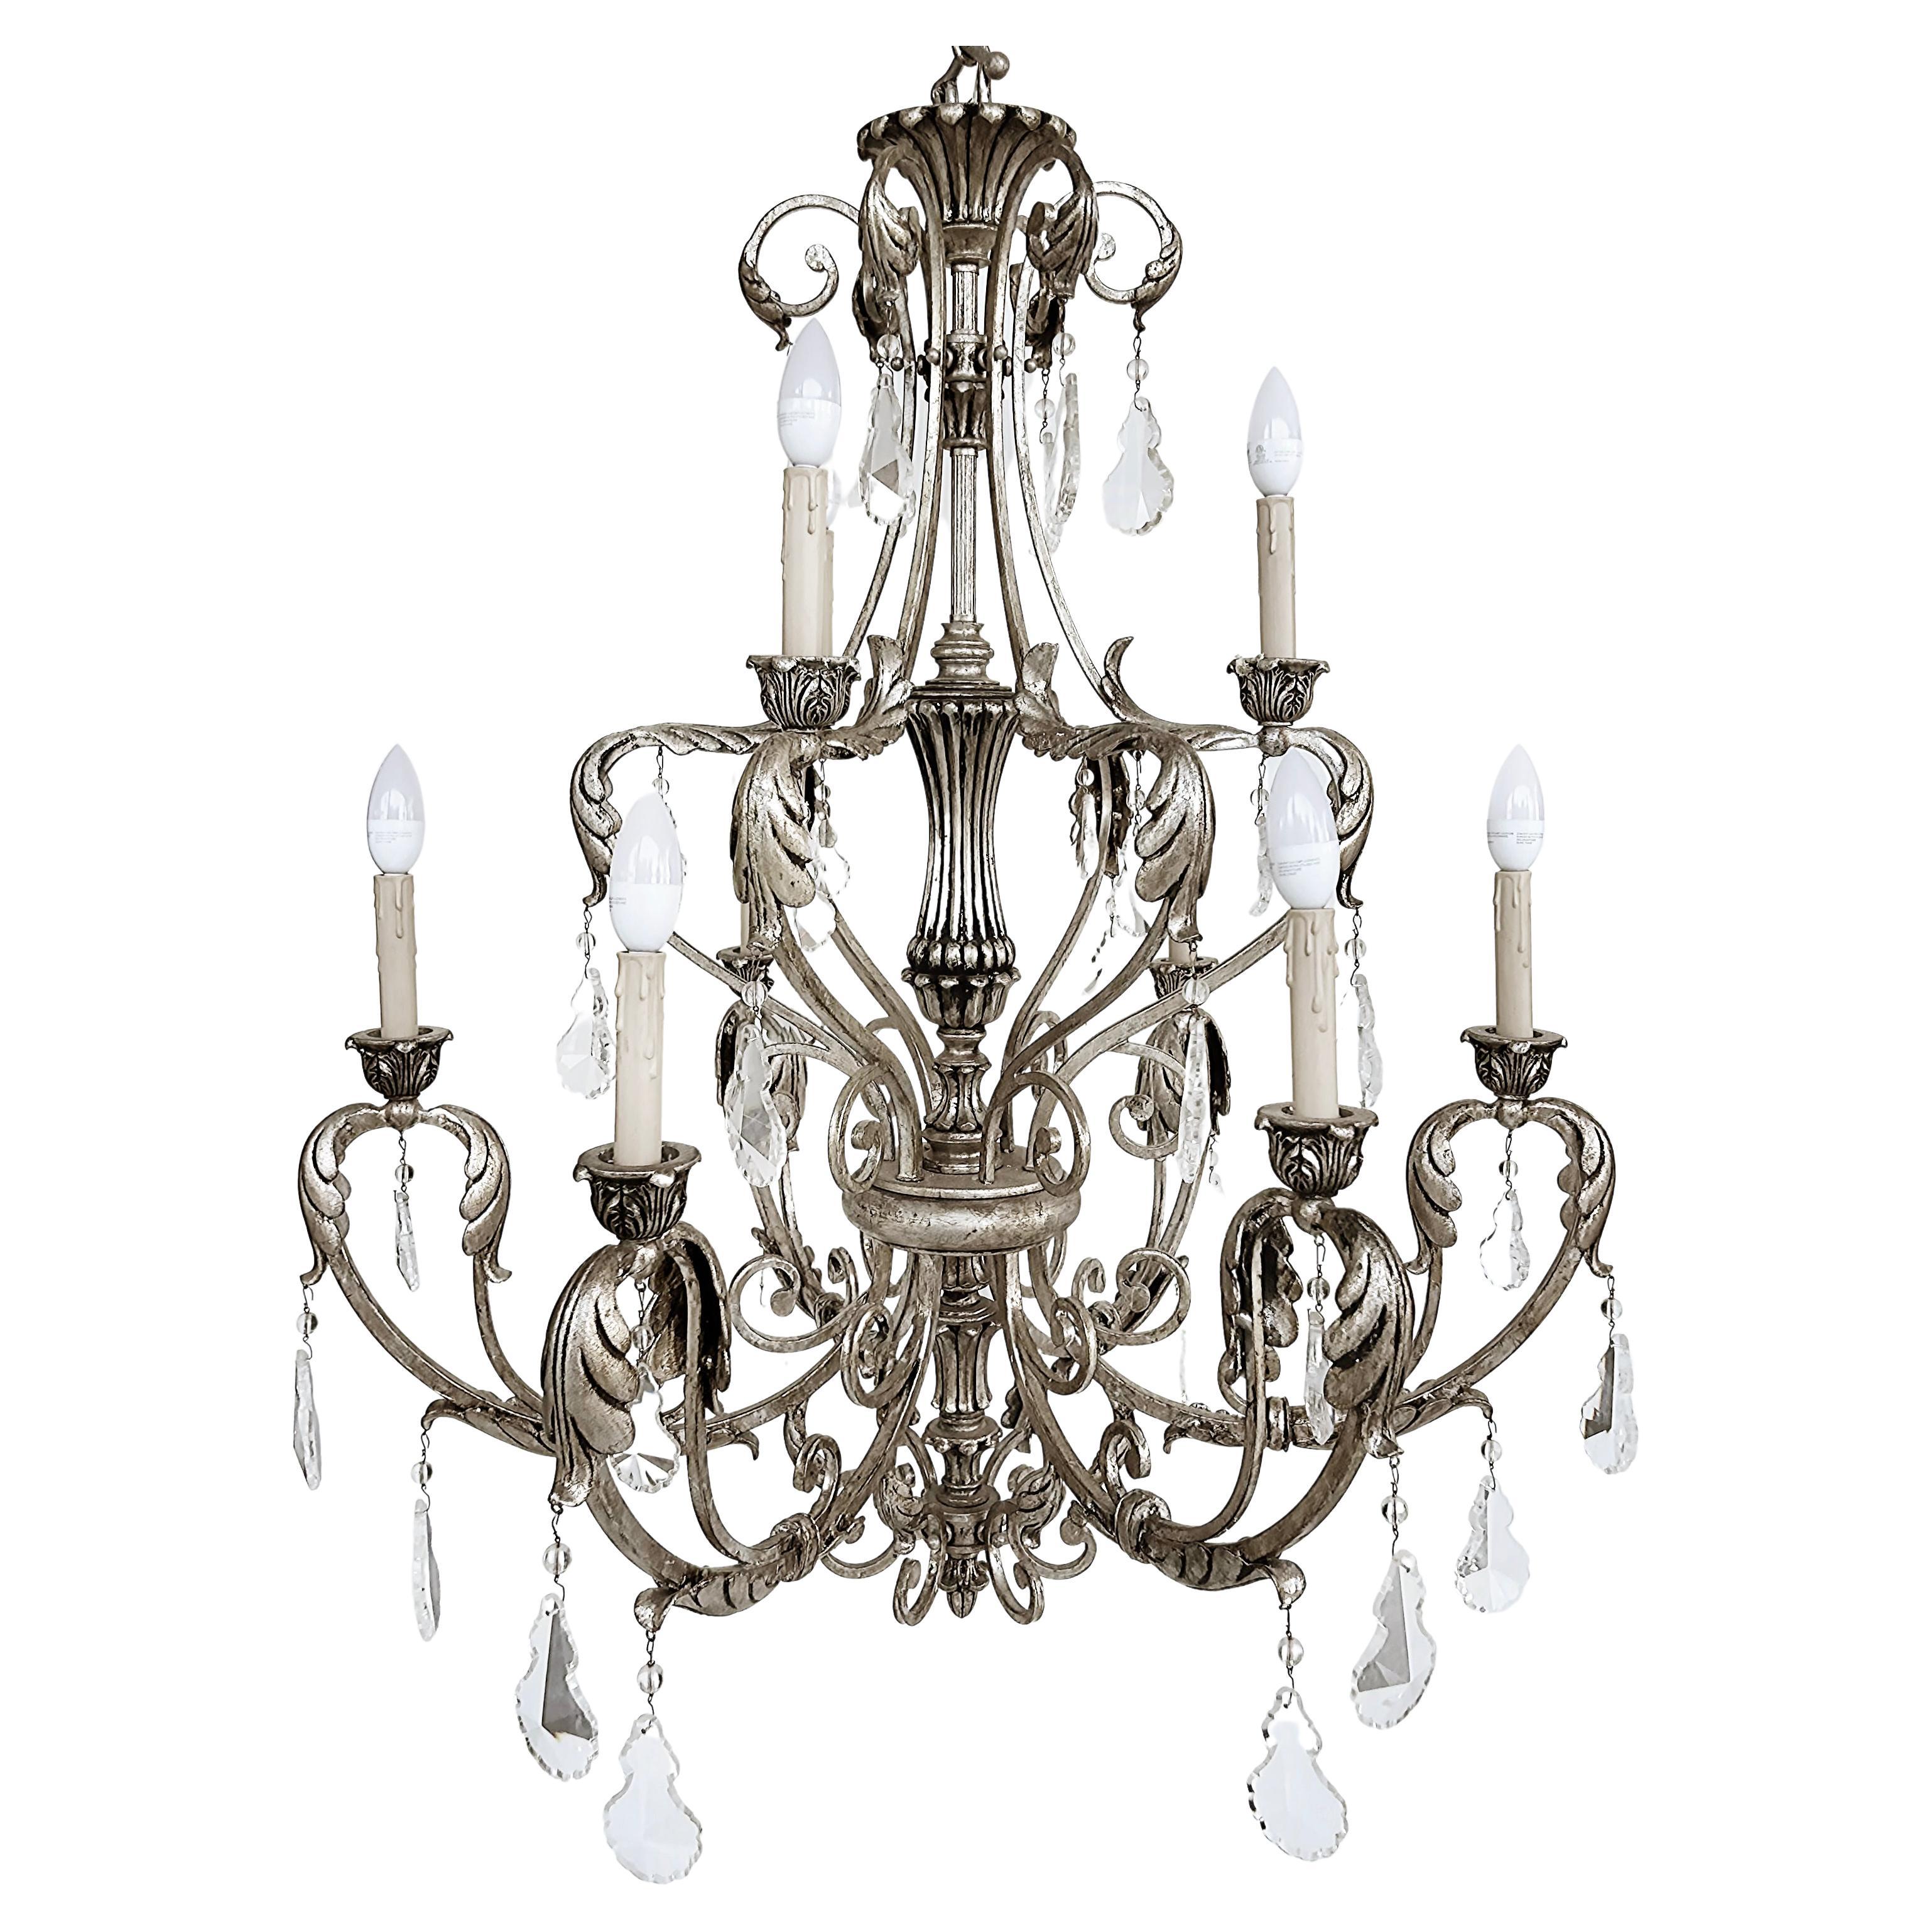 Silvered Wrought Iron Crystal 9 Arm Chandelier, Original Canopy